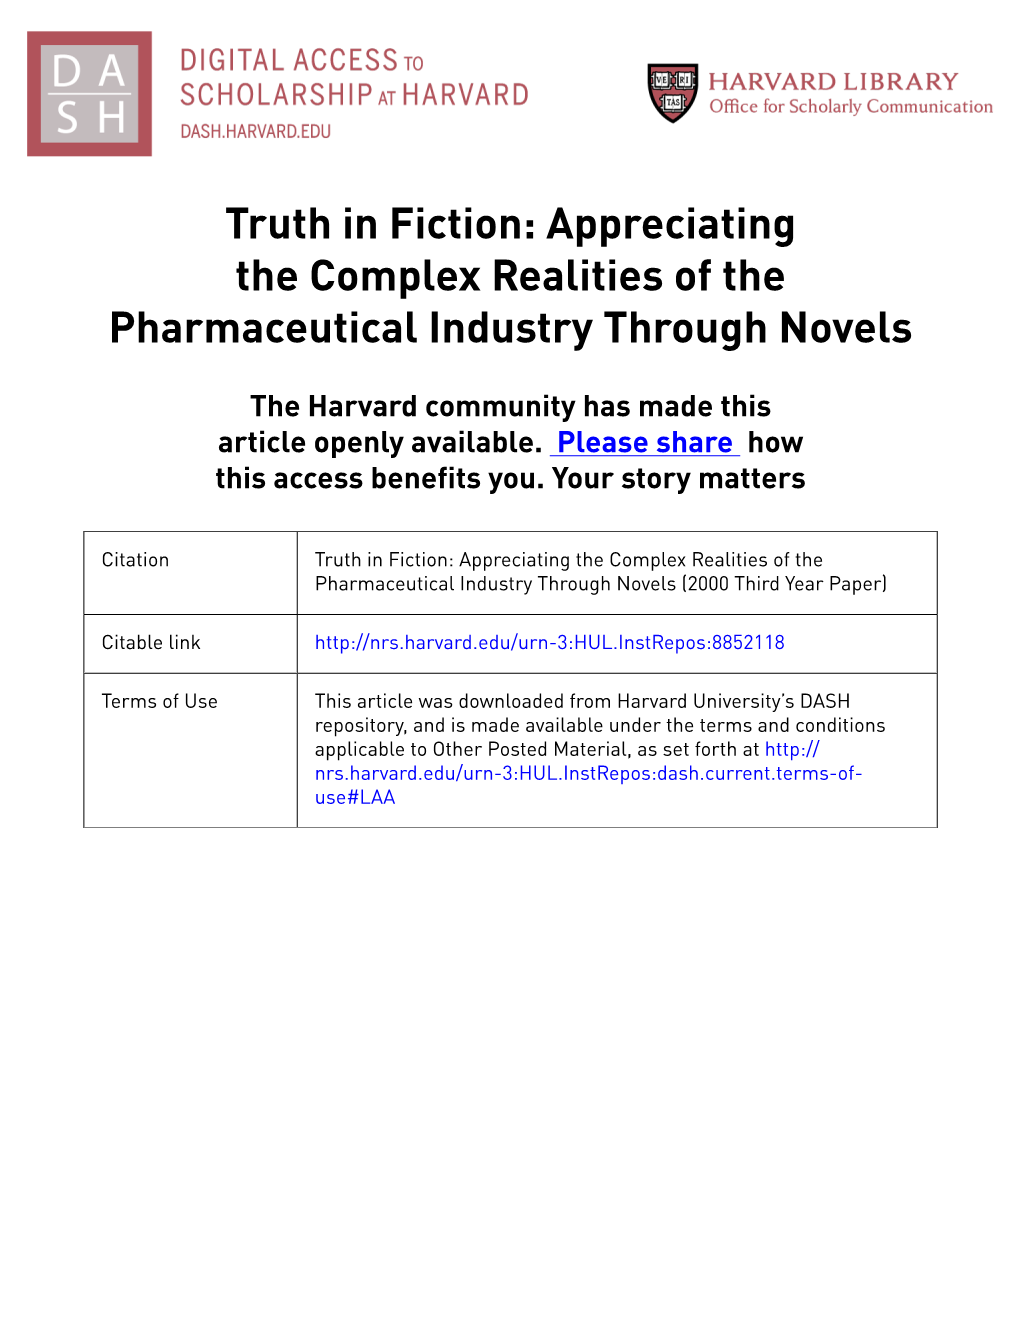 Truth in Fiction: Appreciating the Complex Realities of the Pharmaceutical Industry Through Novels